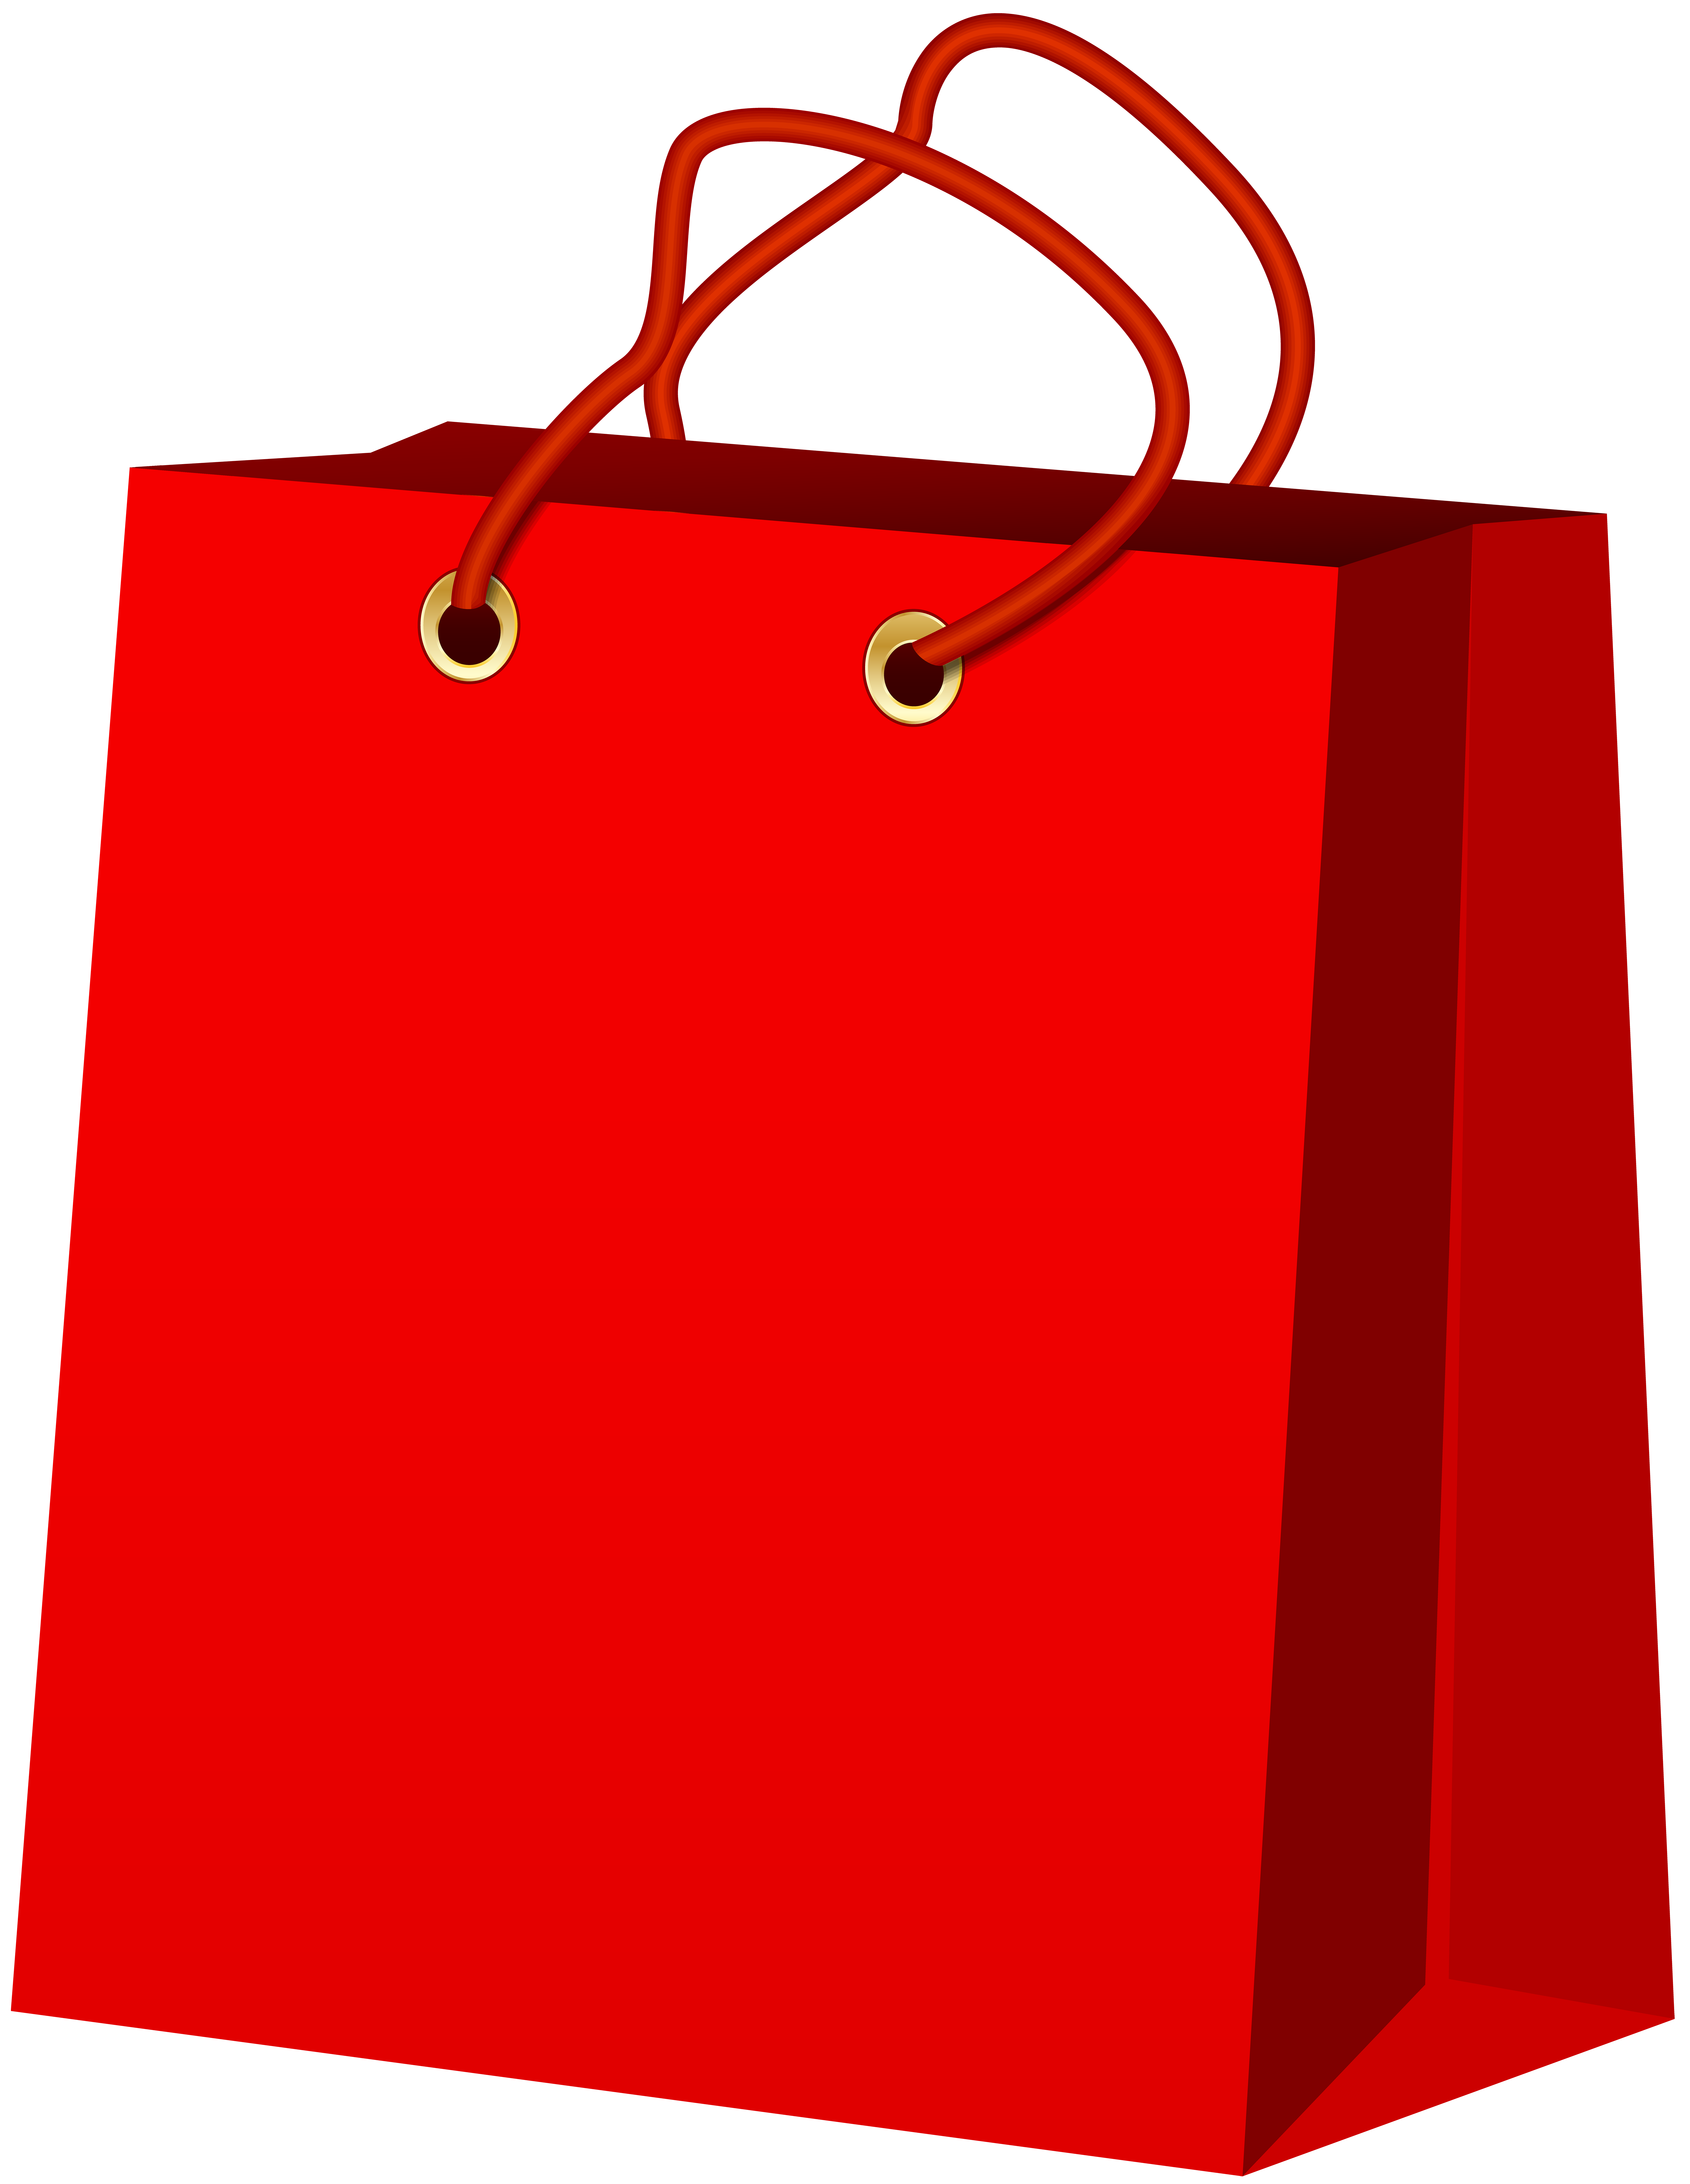 Red Gift Bag PNG Clip Art - Best WEB Clipart